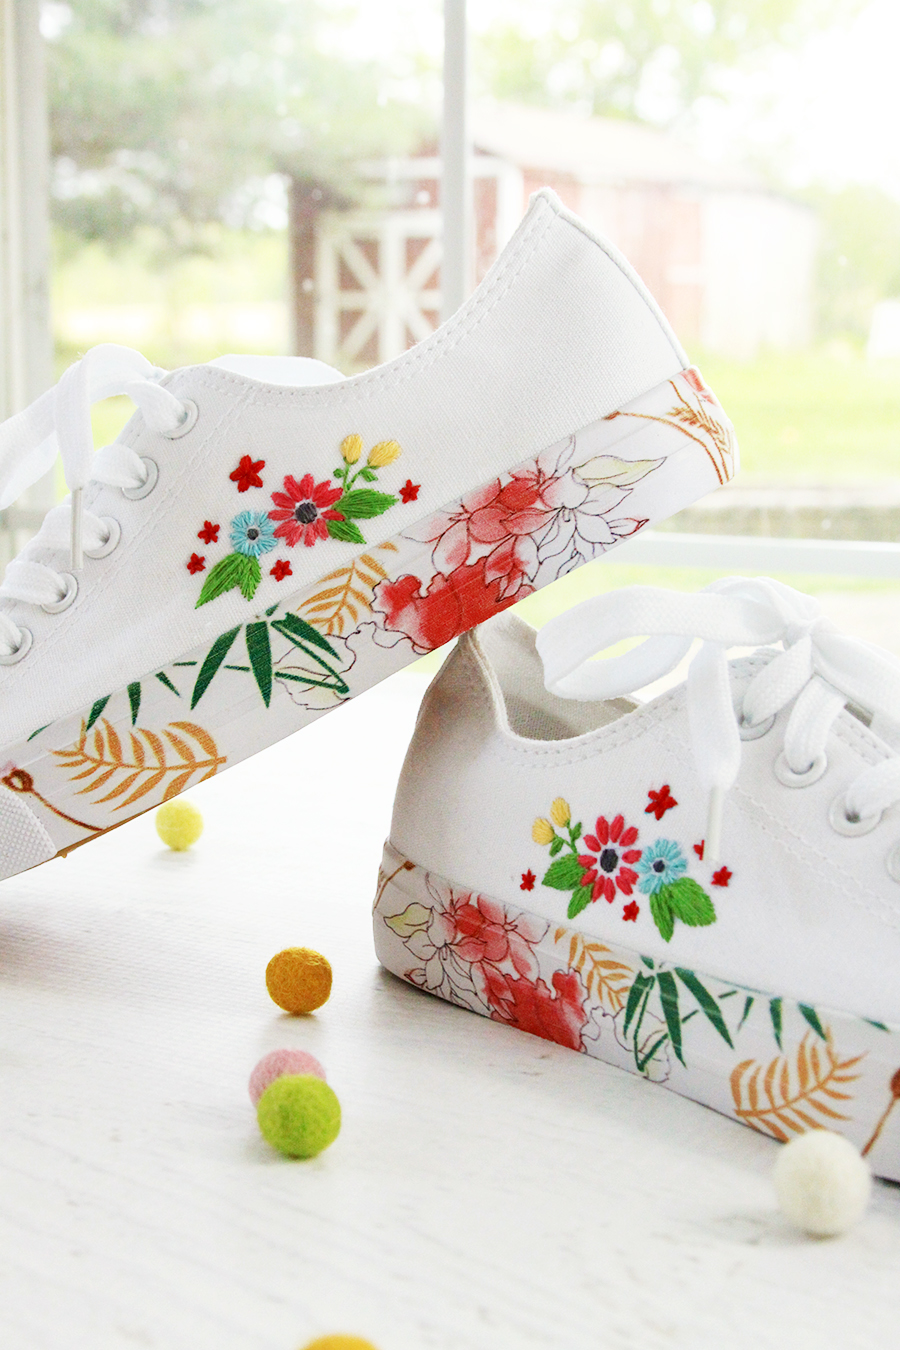 https://flamingotoes.com/wp-content/uploads/2019/04/Floral-Embroidered-Tennis-Shoes.jpg